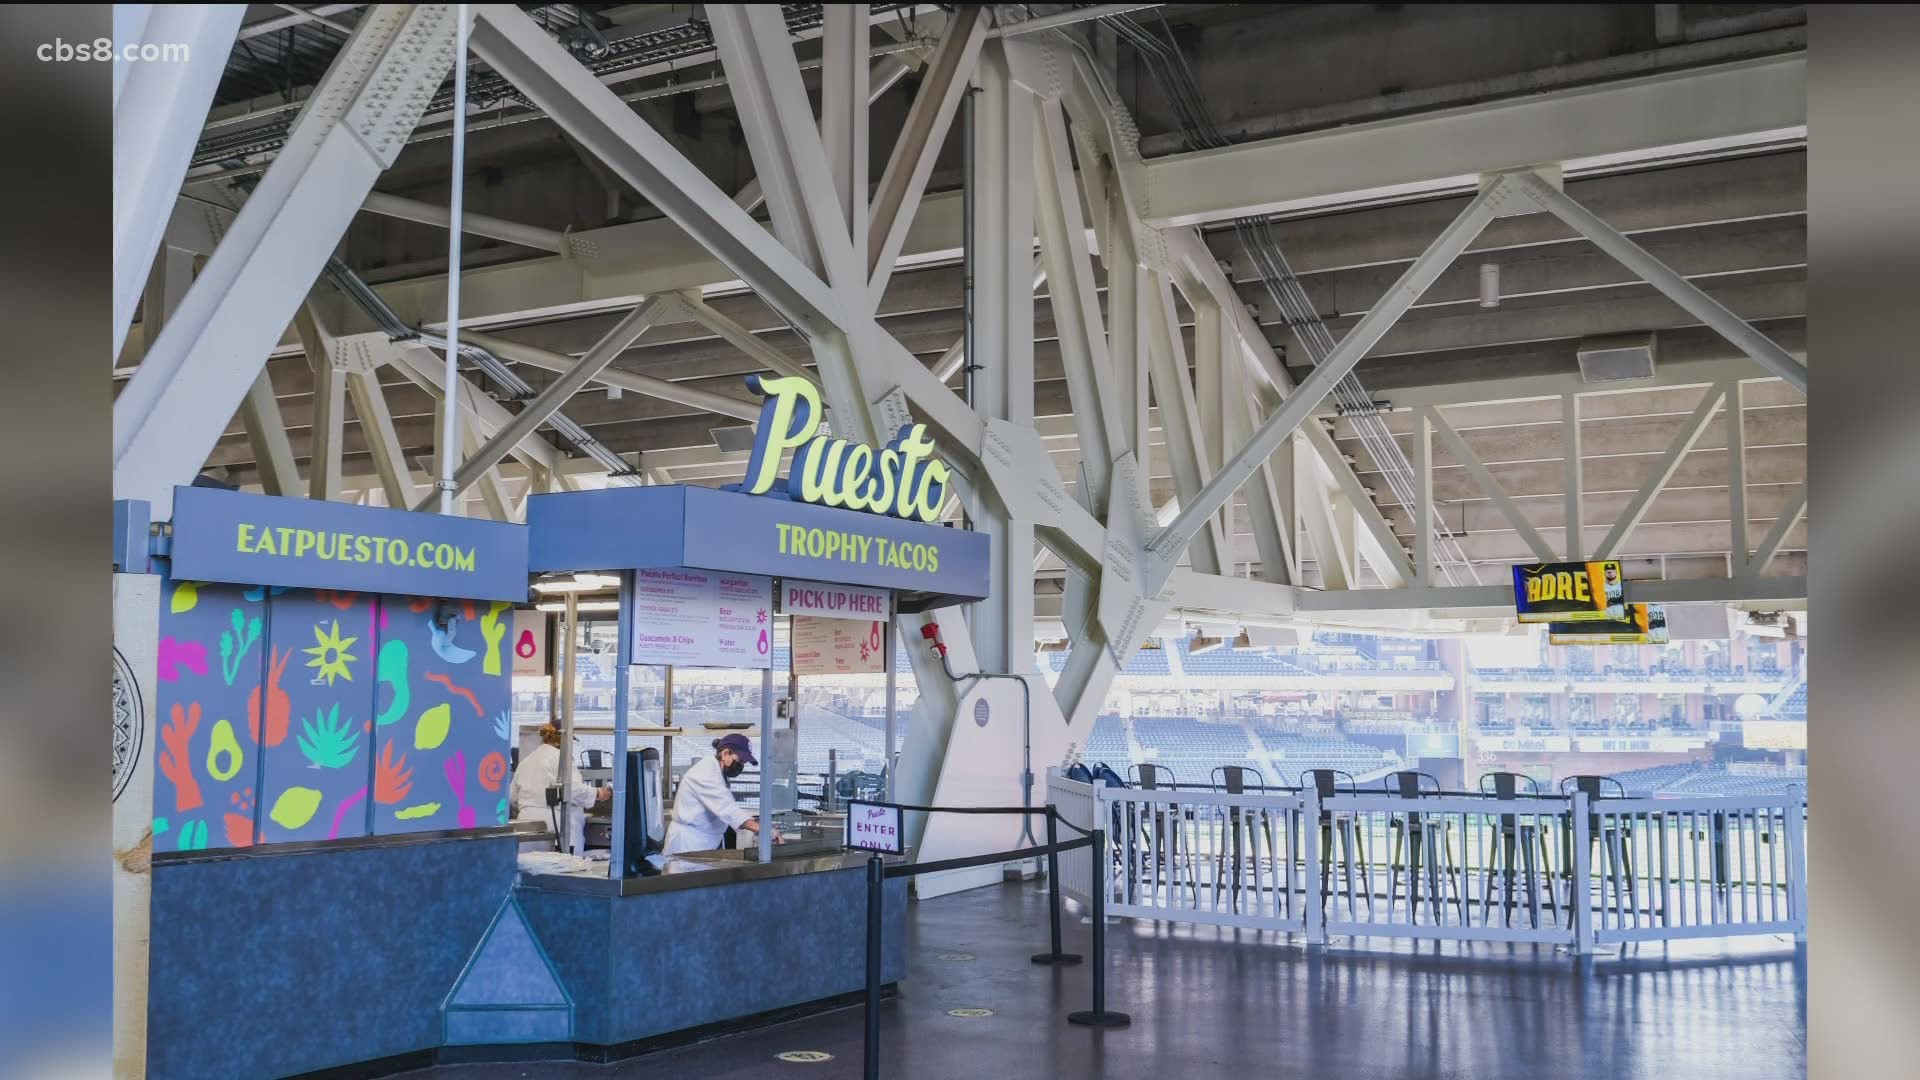 Puesto's Executive Chef, Ian Tenzer, joined Morning Extra to share a few of his favorite menu items headed to America's best ballpark.